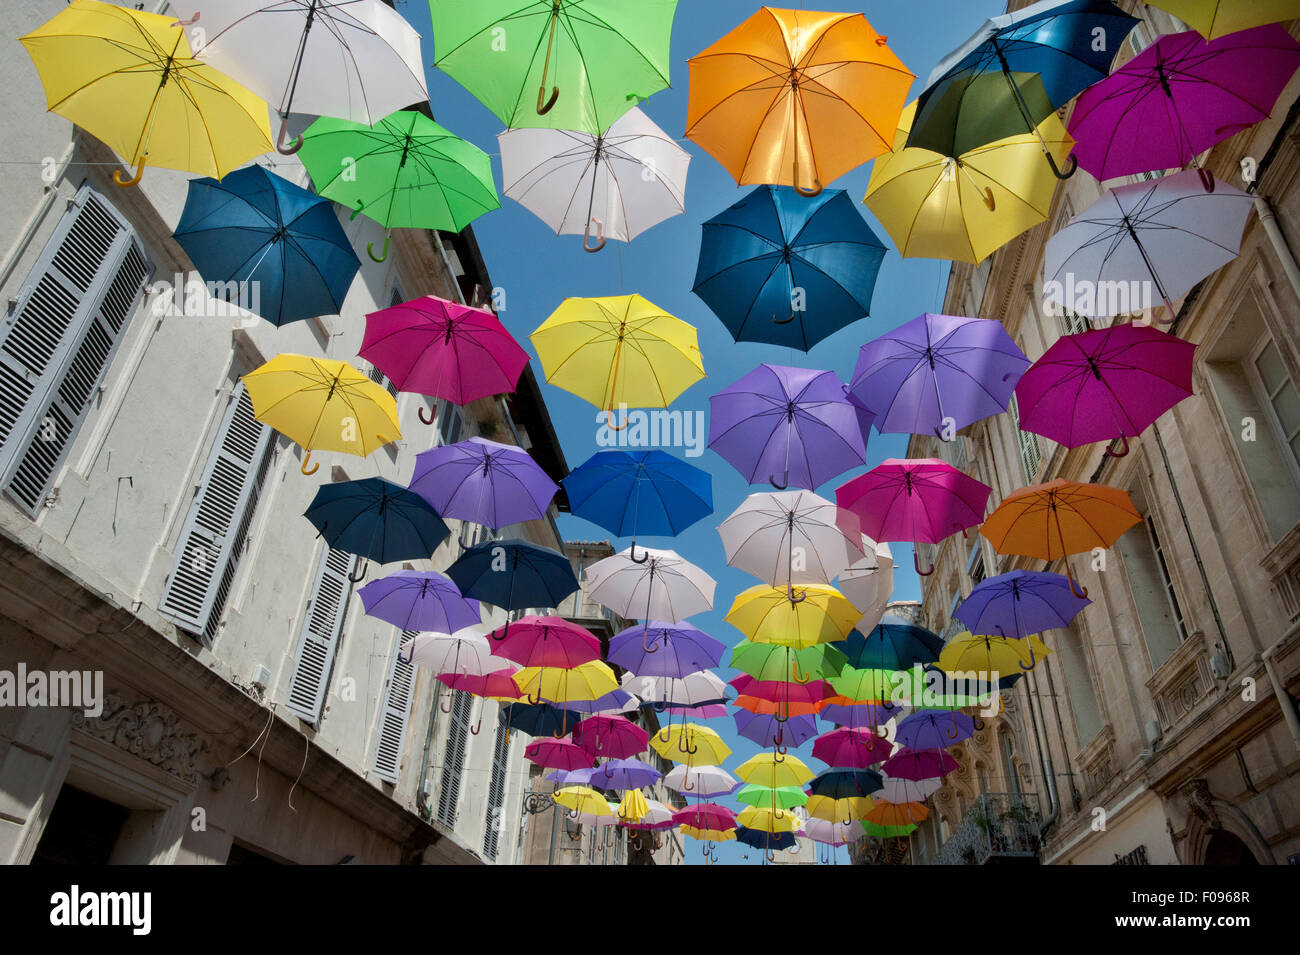 Brightly coloured floating umbrellas fill the sky above Rue Jean Jaures, Arles,Bouches-du-Rhône department, Provence, France Stock Photo